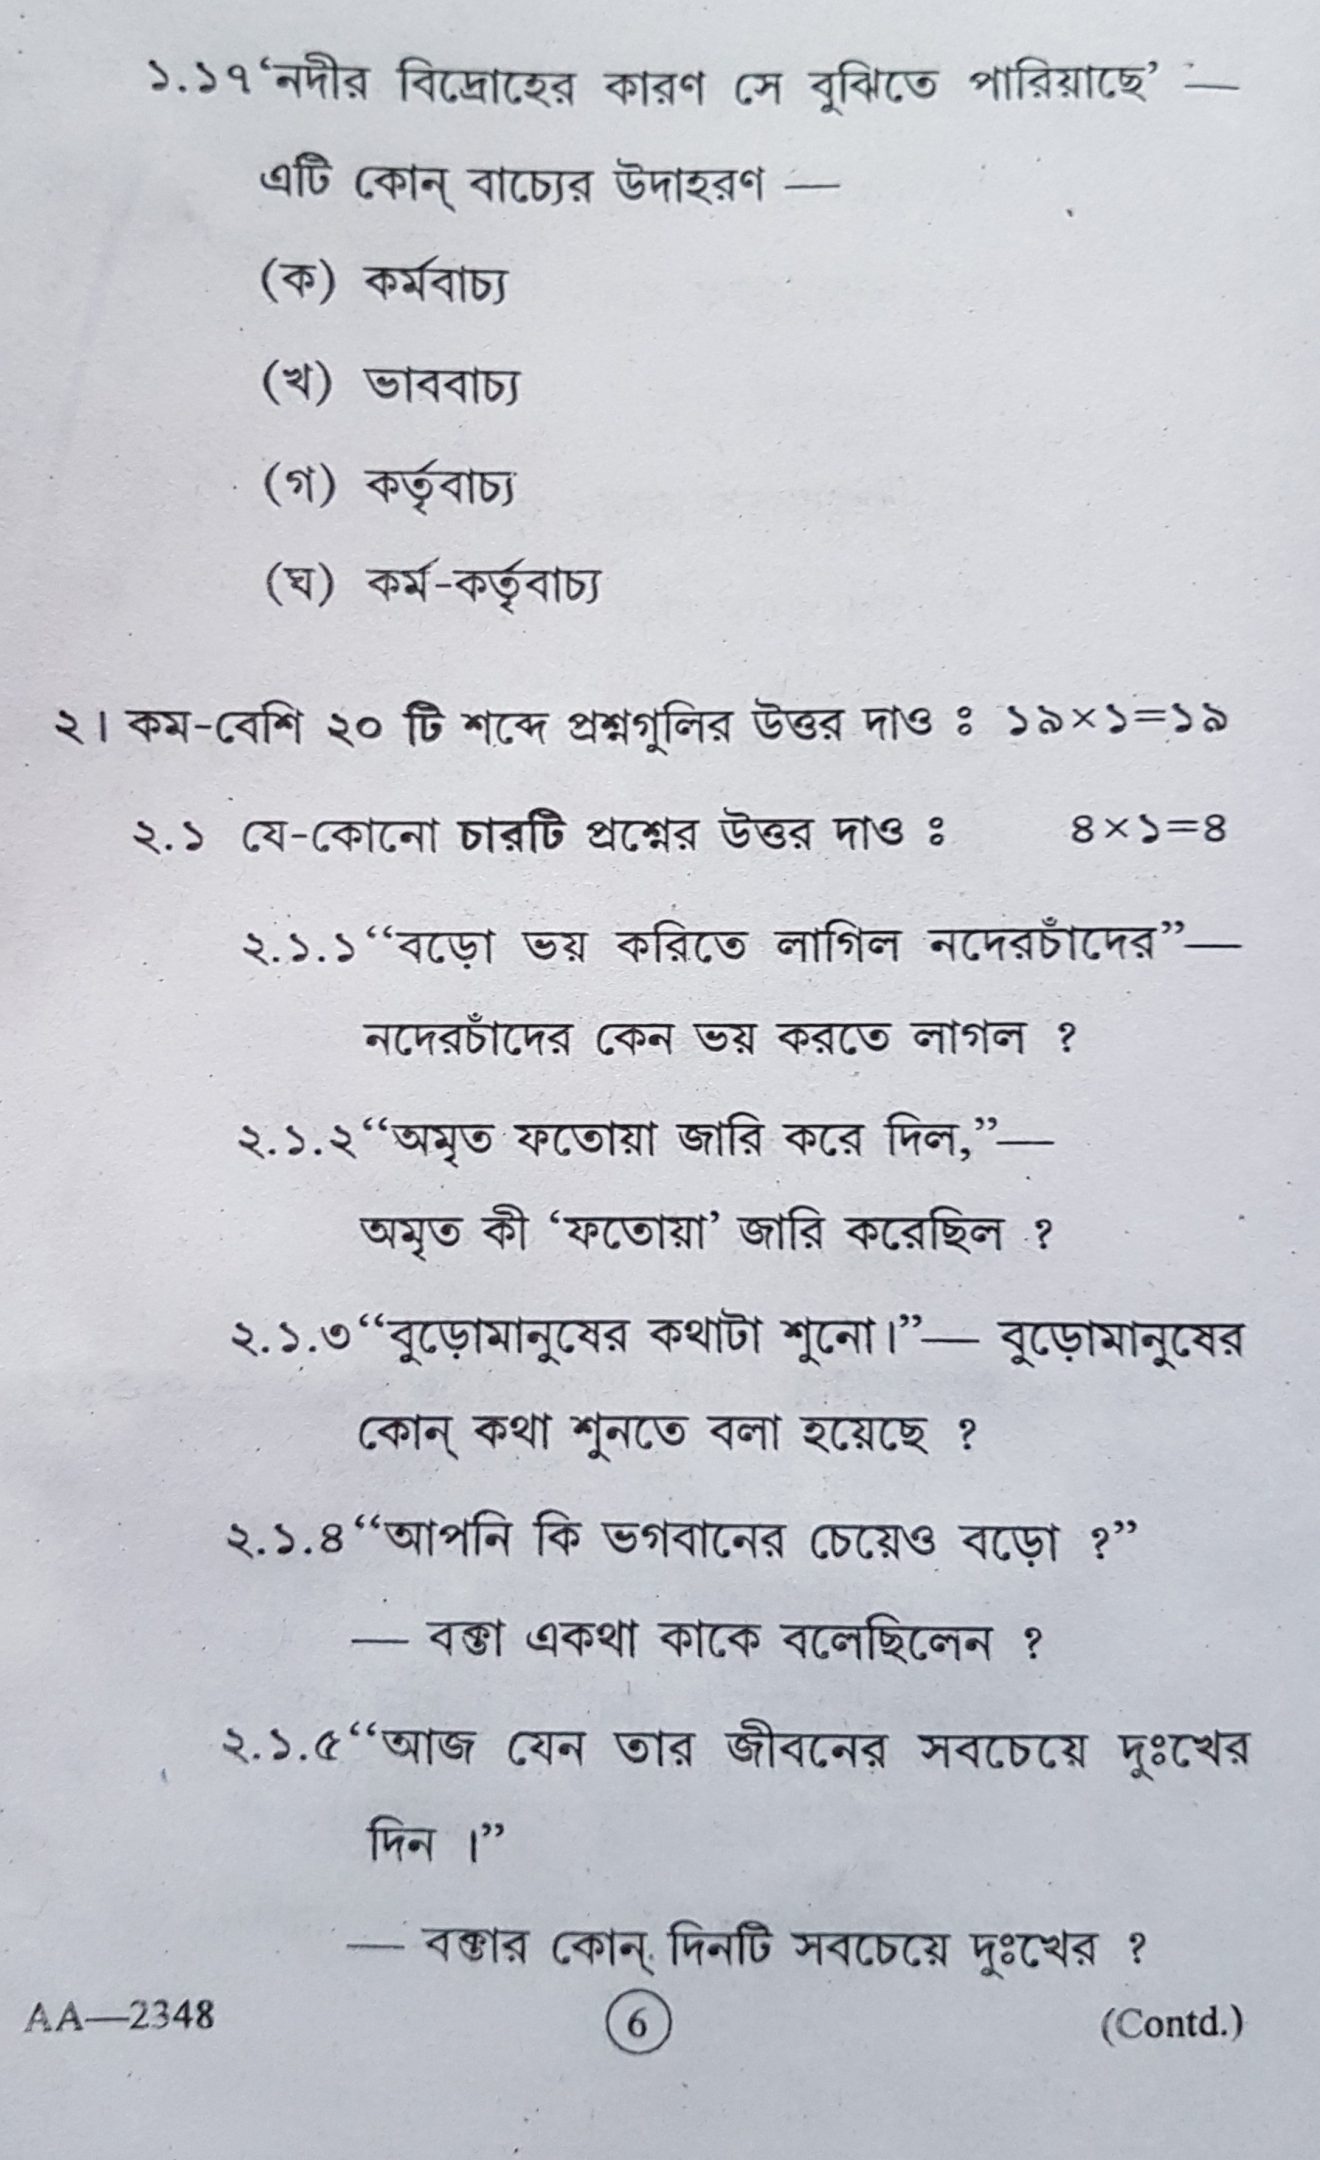 west-bengal-madhyamik-bengali-question-paper-2020-wbbse-west-bengal